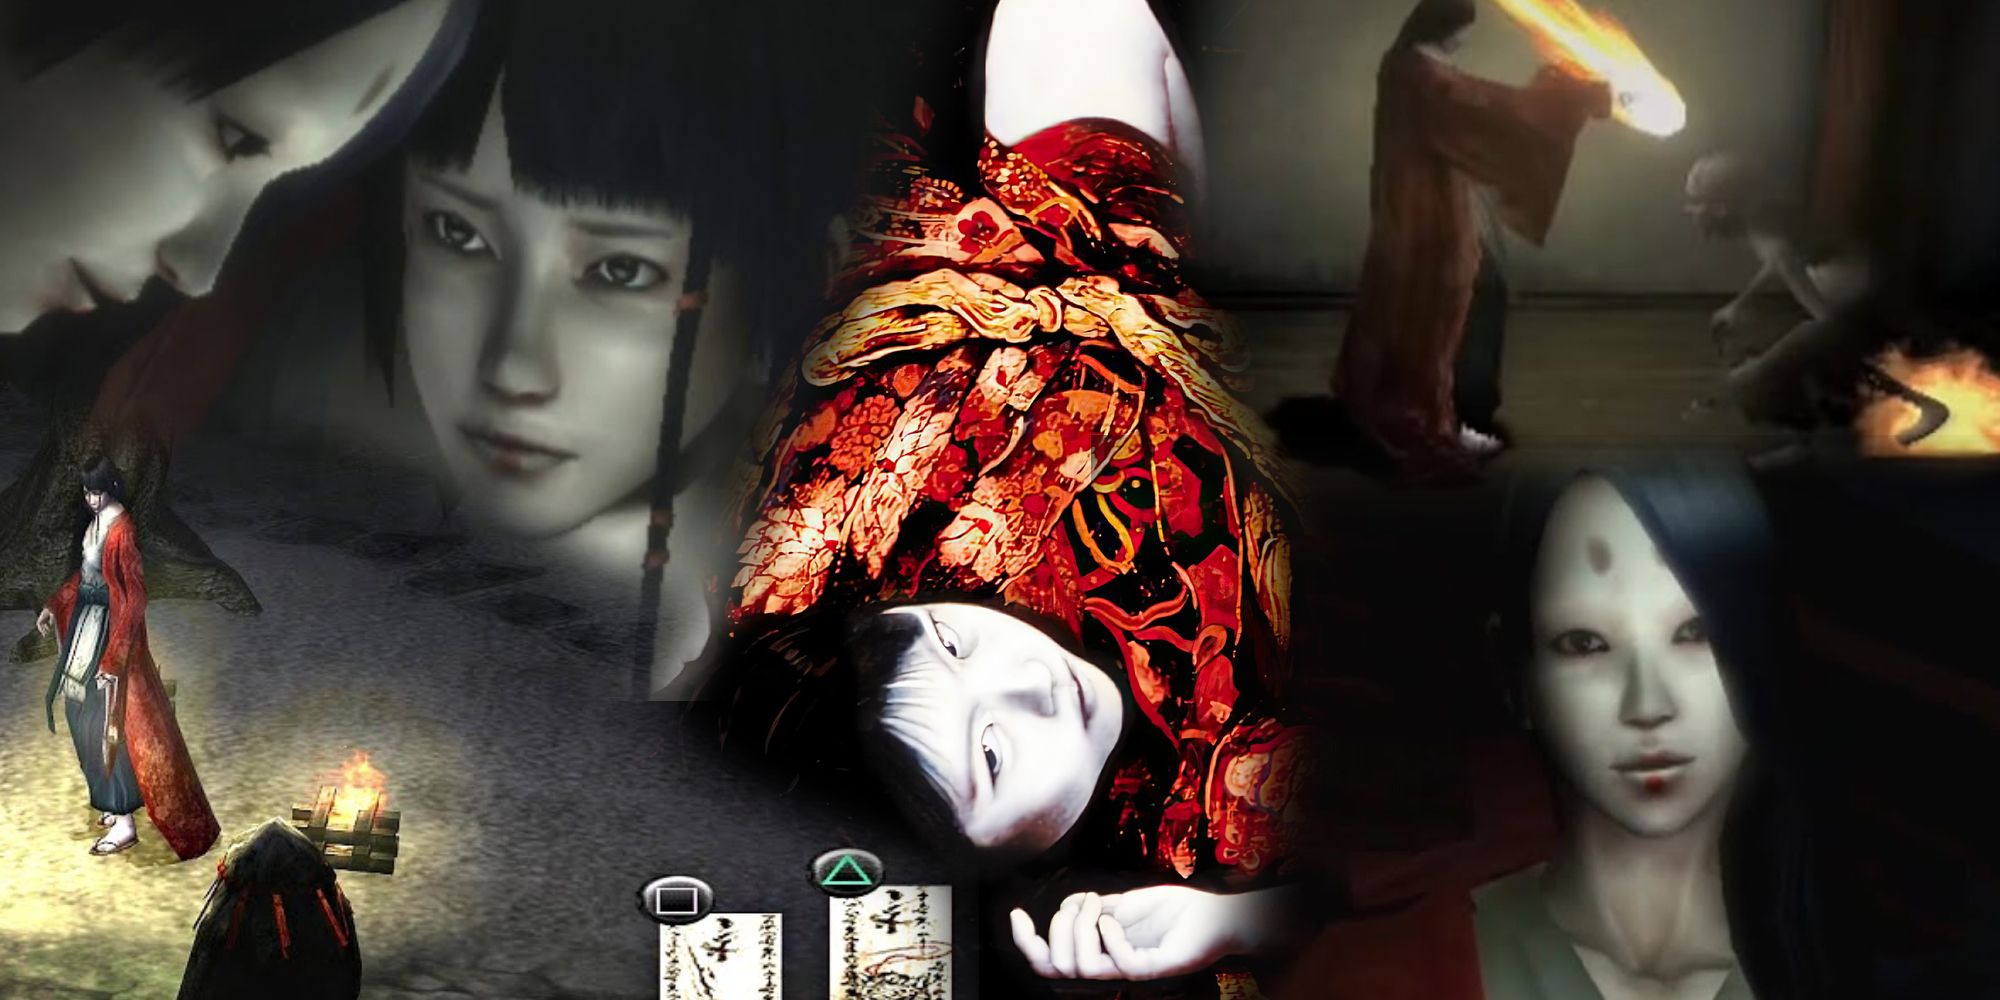 Kuon supernatural horror set in the heian kyo era with exorcists and shrine maidens